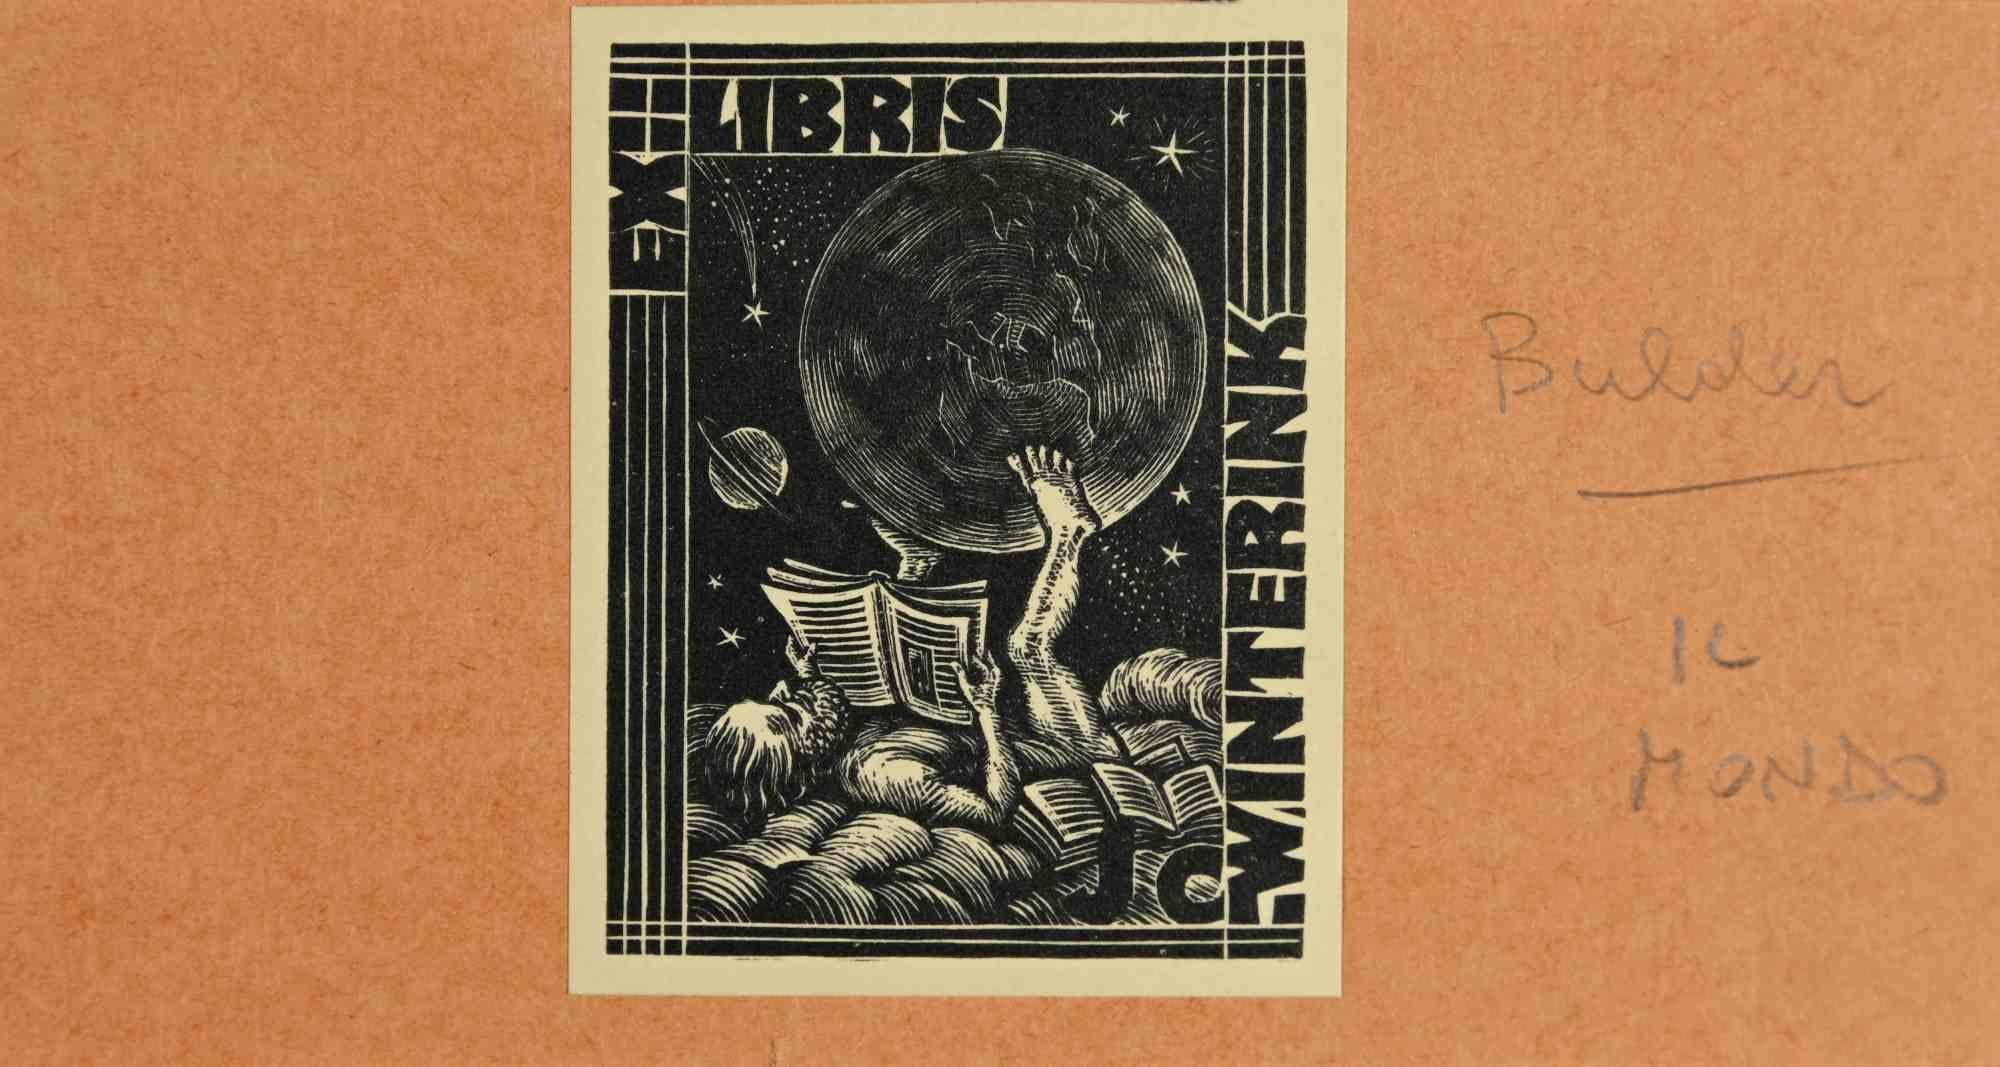 Ex-Libris - Winterink is an Artwork realized in 1940s, by the Artist Nico Bulder.

Woodcut print on ivory paper. Signed on plate on the lower margin.

The work is glued on colored cardboard. Total dimensions: 8 x 16 cm.

Good conditions.

The artist